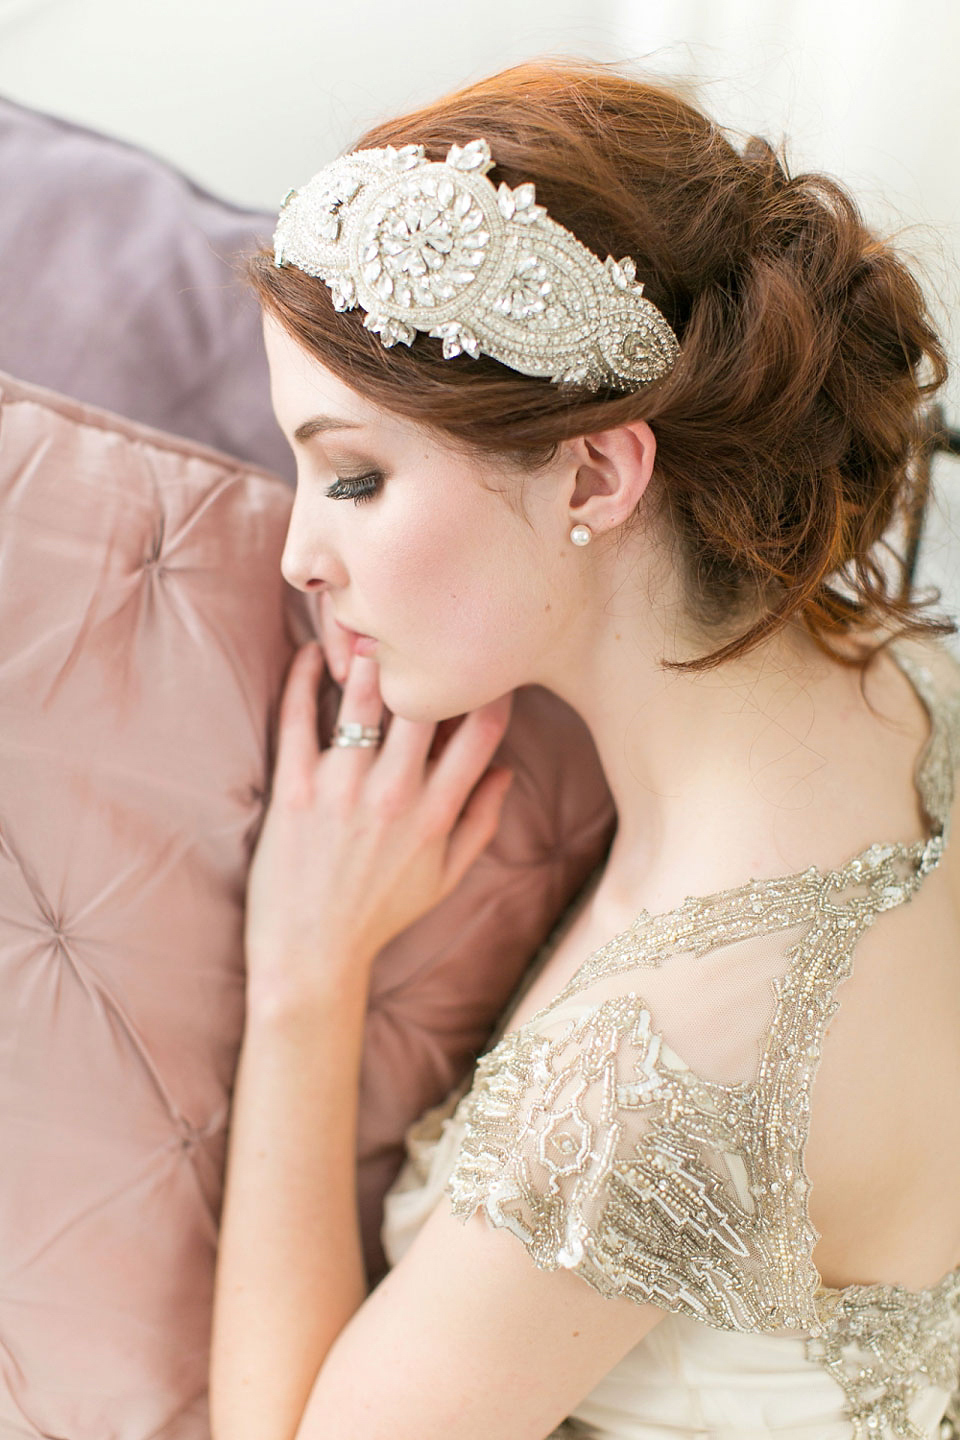 Victoria Millésime bridal accessories - treasured heirloom inspired headpieces for modern day brides.